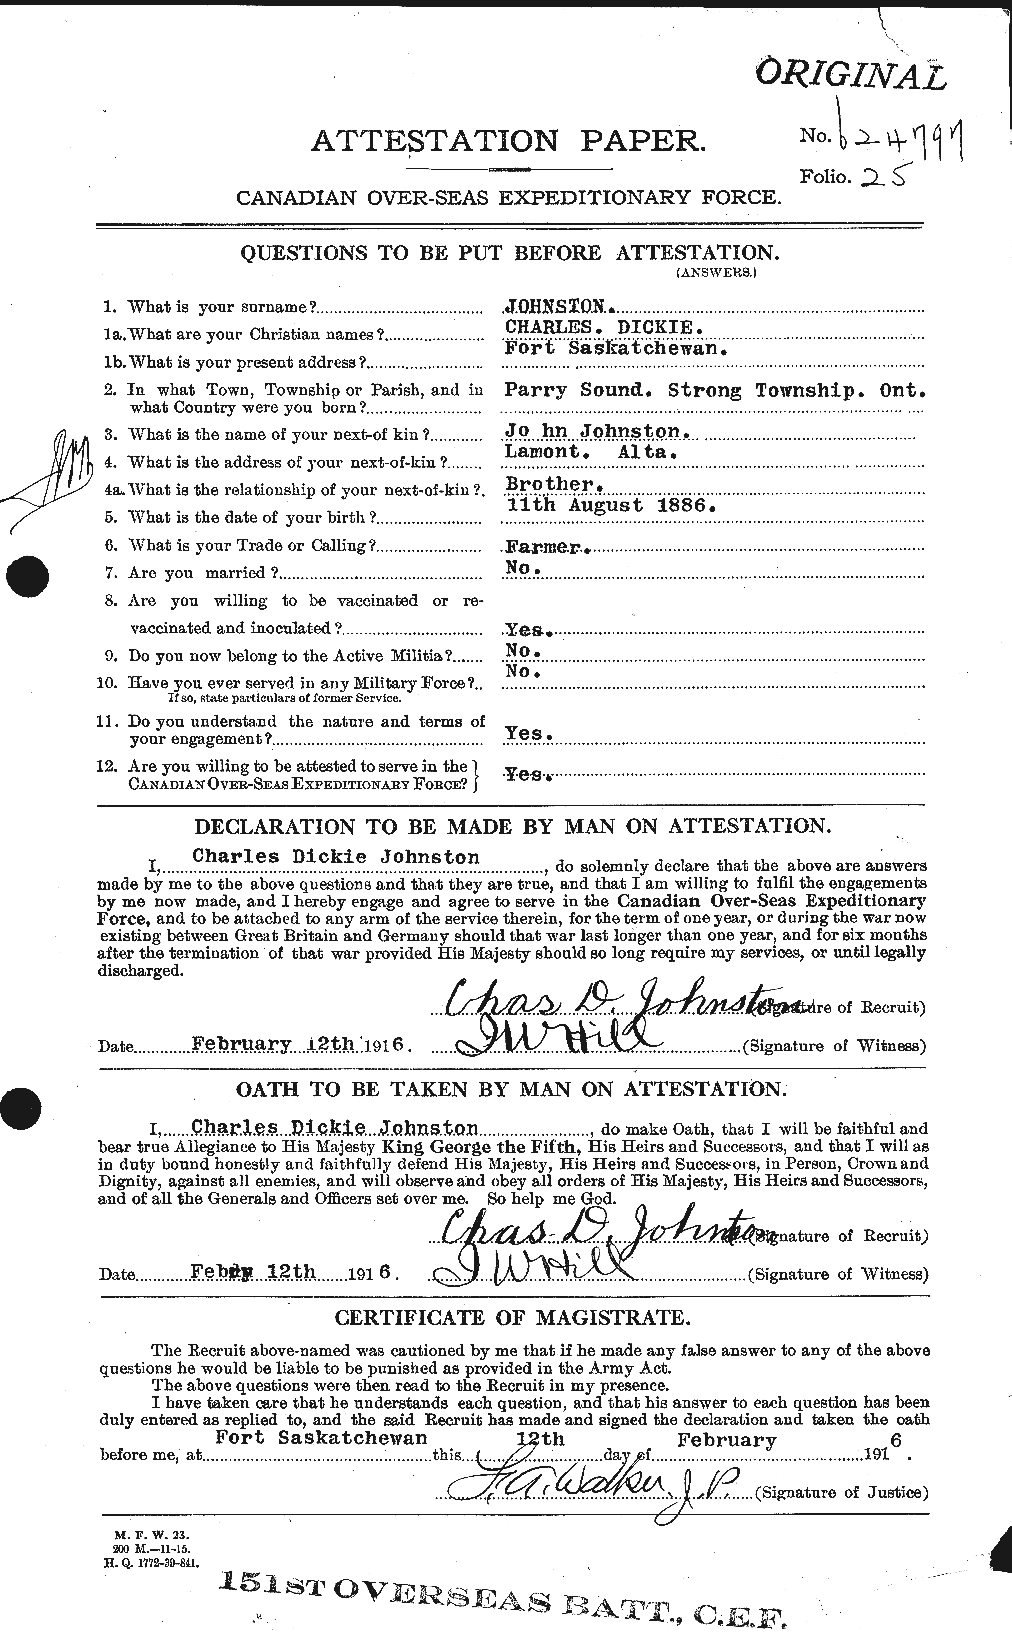 Personnel Records of the First World War - CEF 423100a